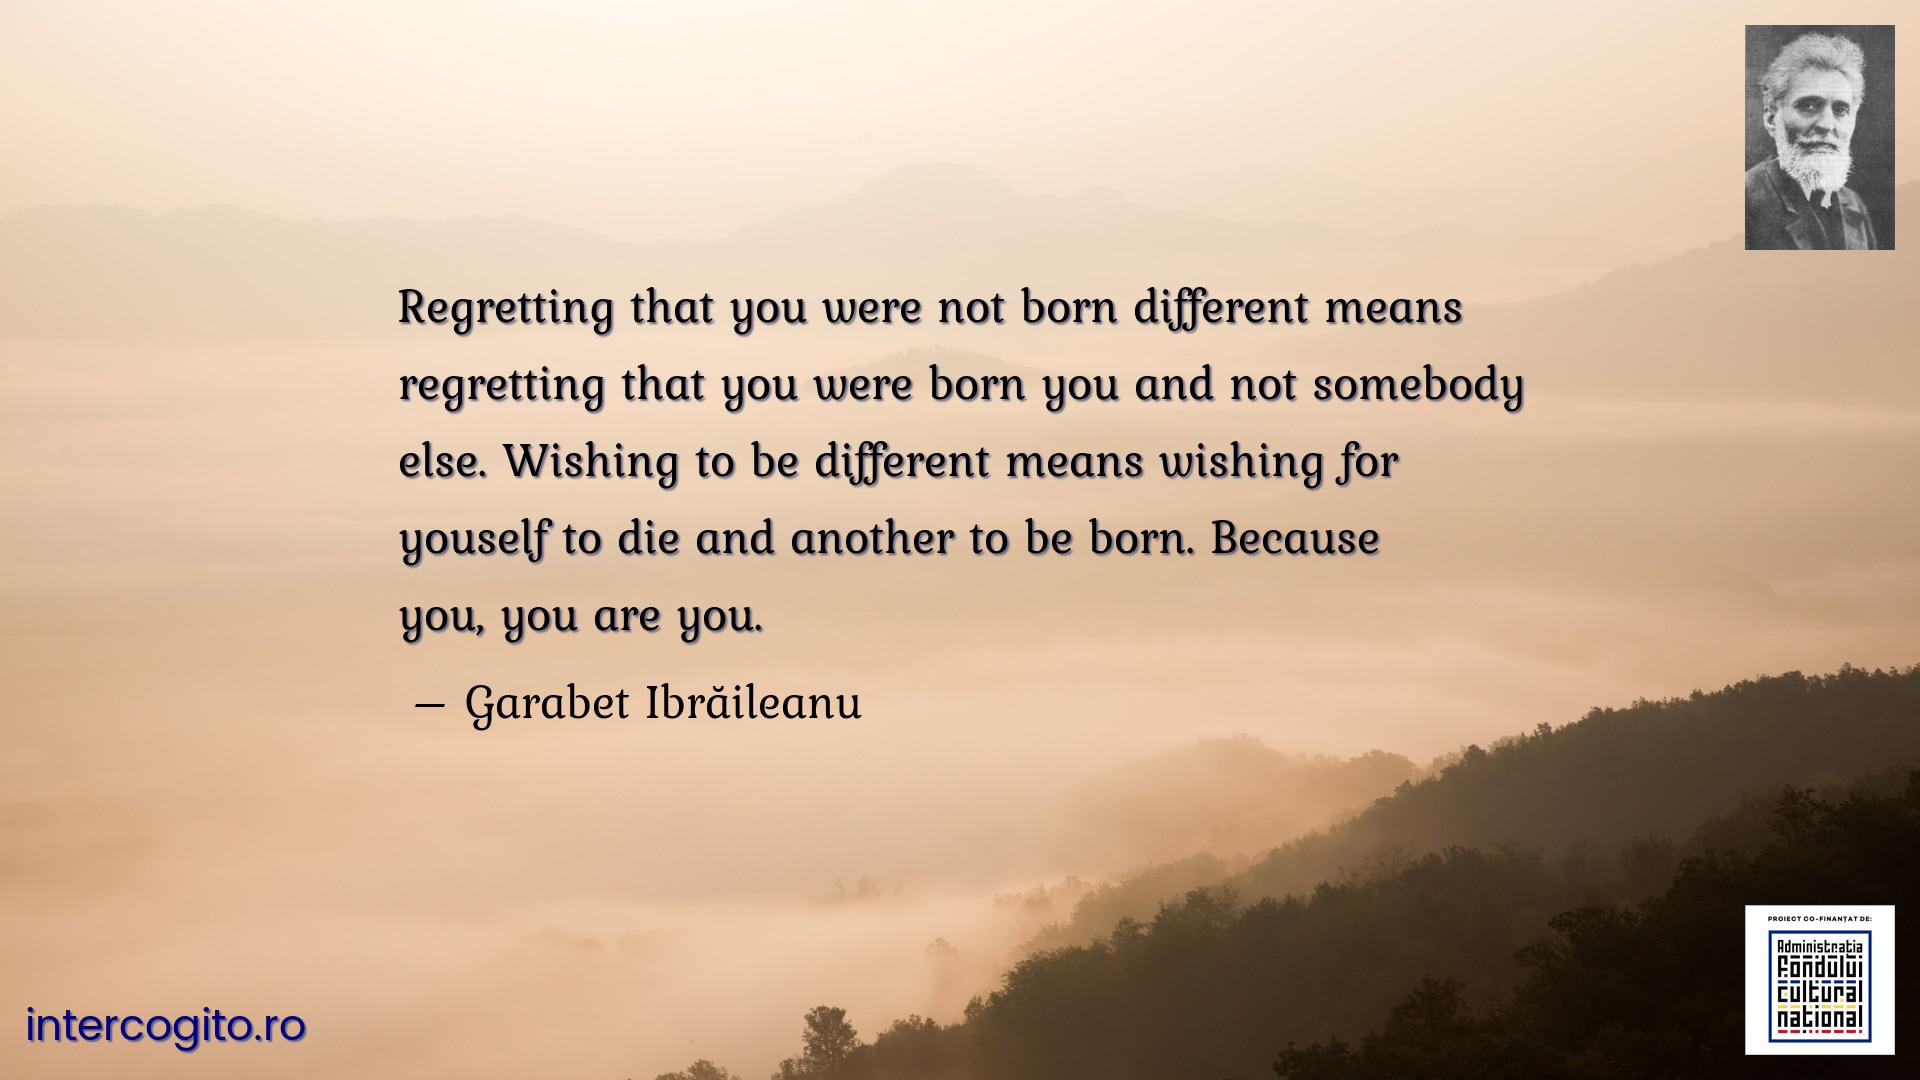 Regretting that you were not born different means regretting that you were born you and not somebody else. Wishing to be different means wishing for youself to die and another to be born. Because you, you are you.